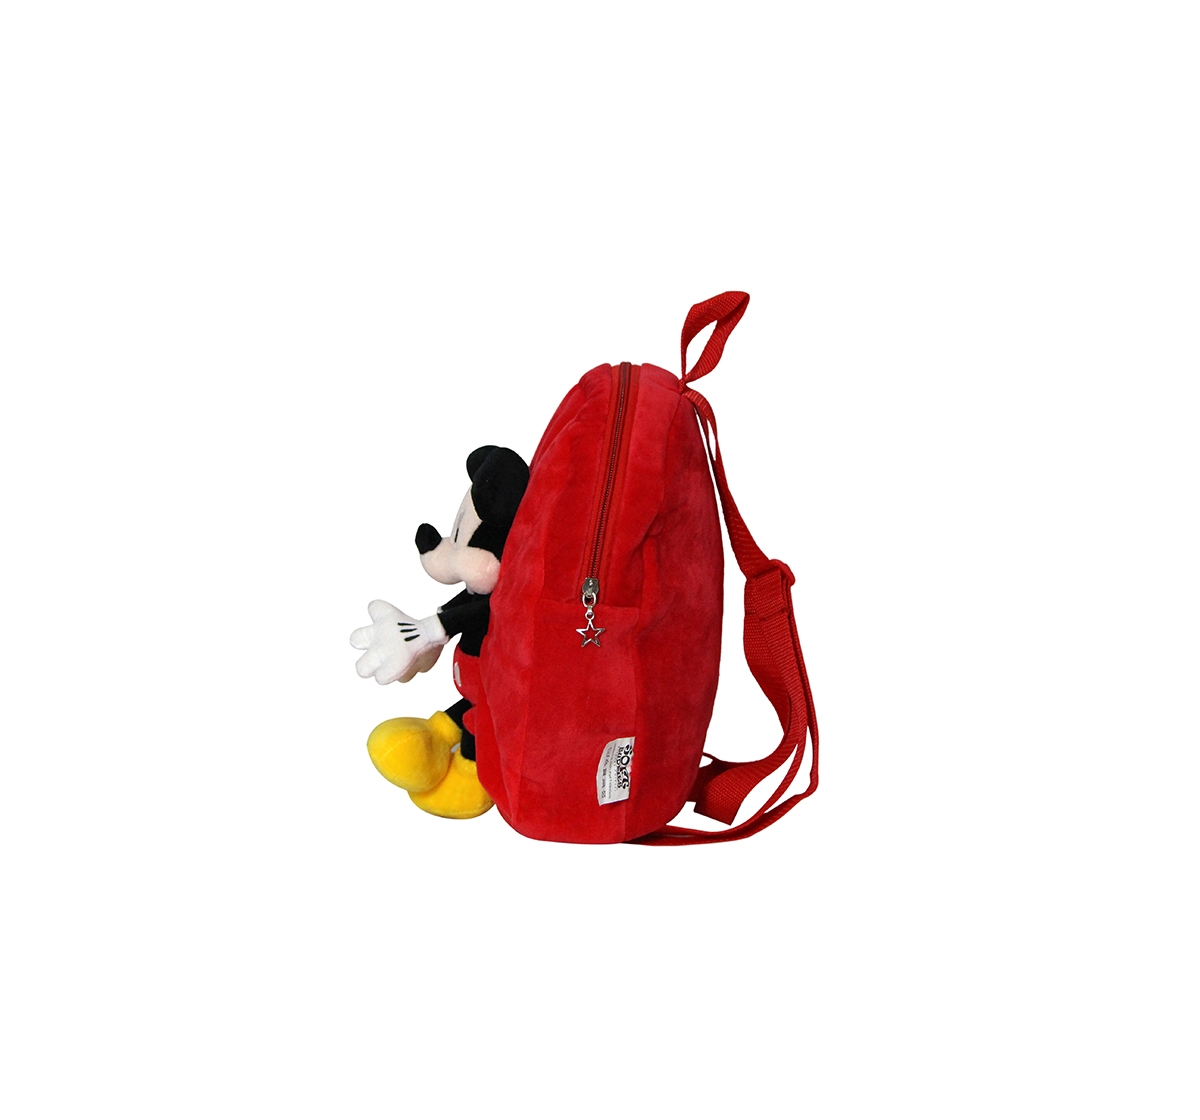 DISNEY | Disney Happiness Unisex Minnie Backpack_Pink_Free Size Plush Accessories for Kids age 12M+ - 30.48 Cm  2